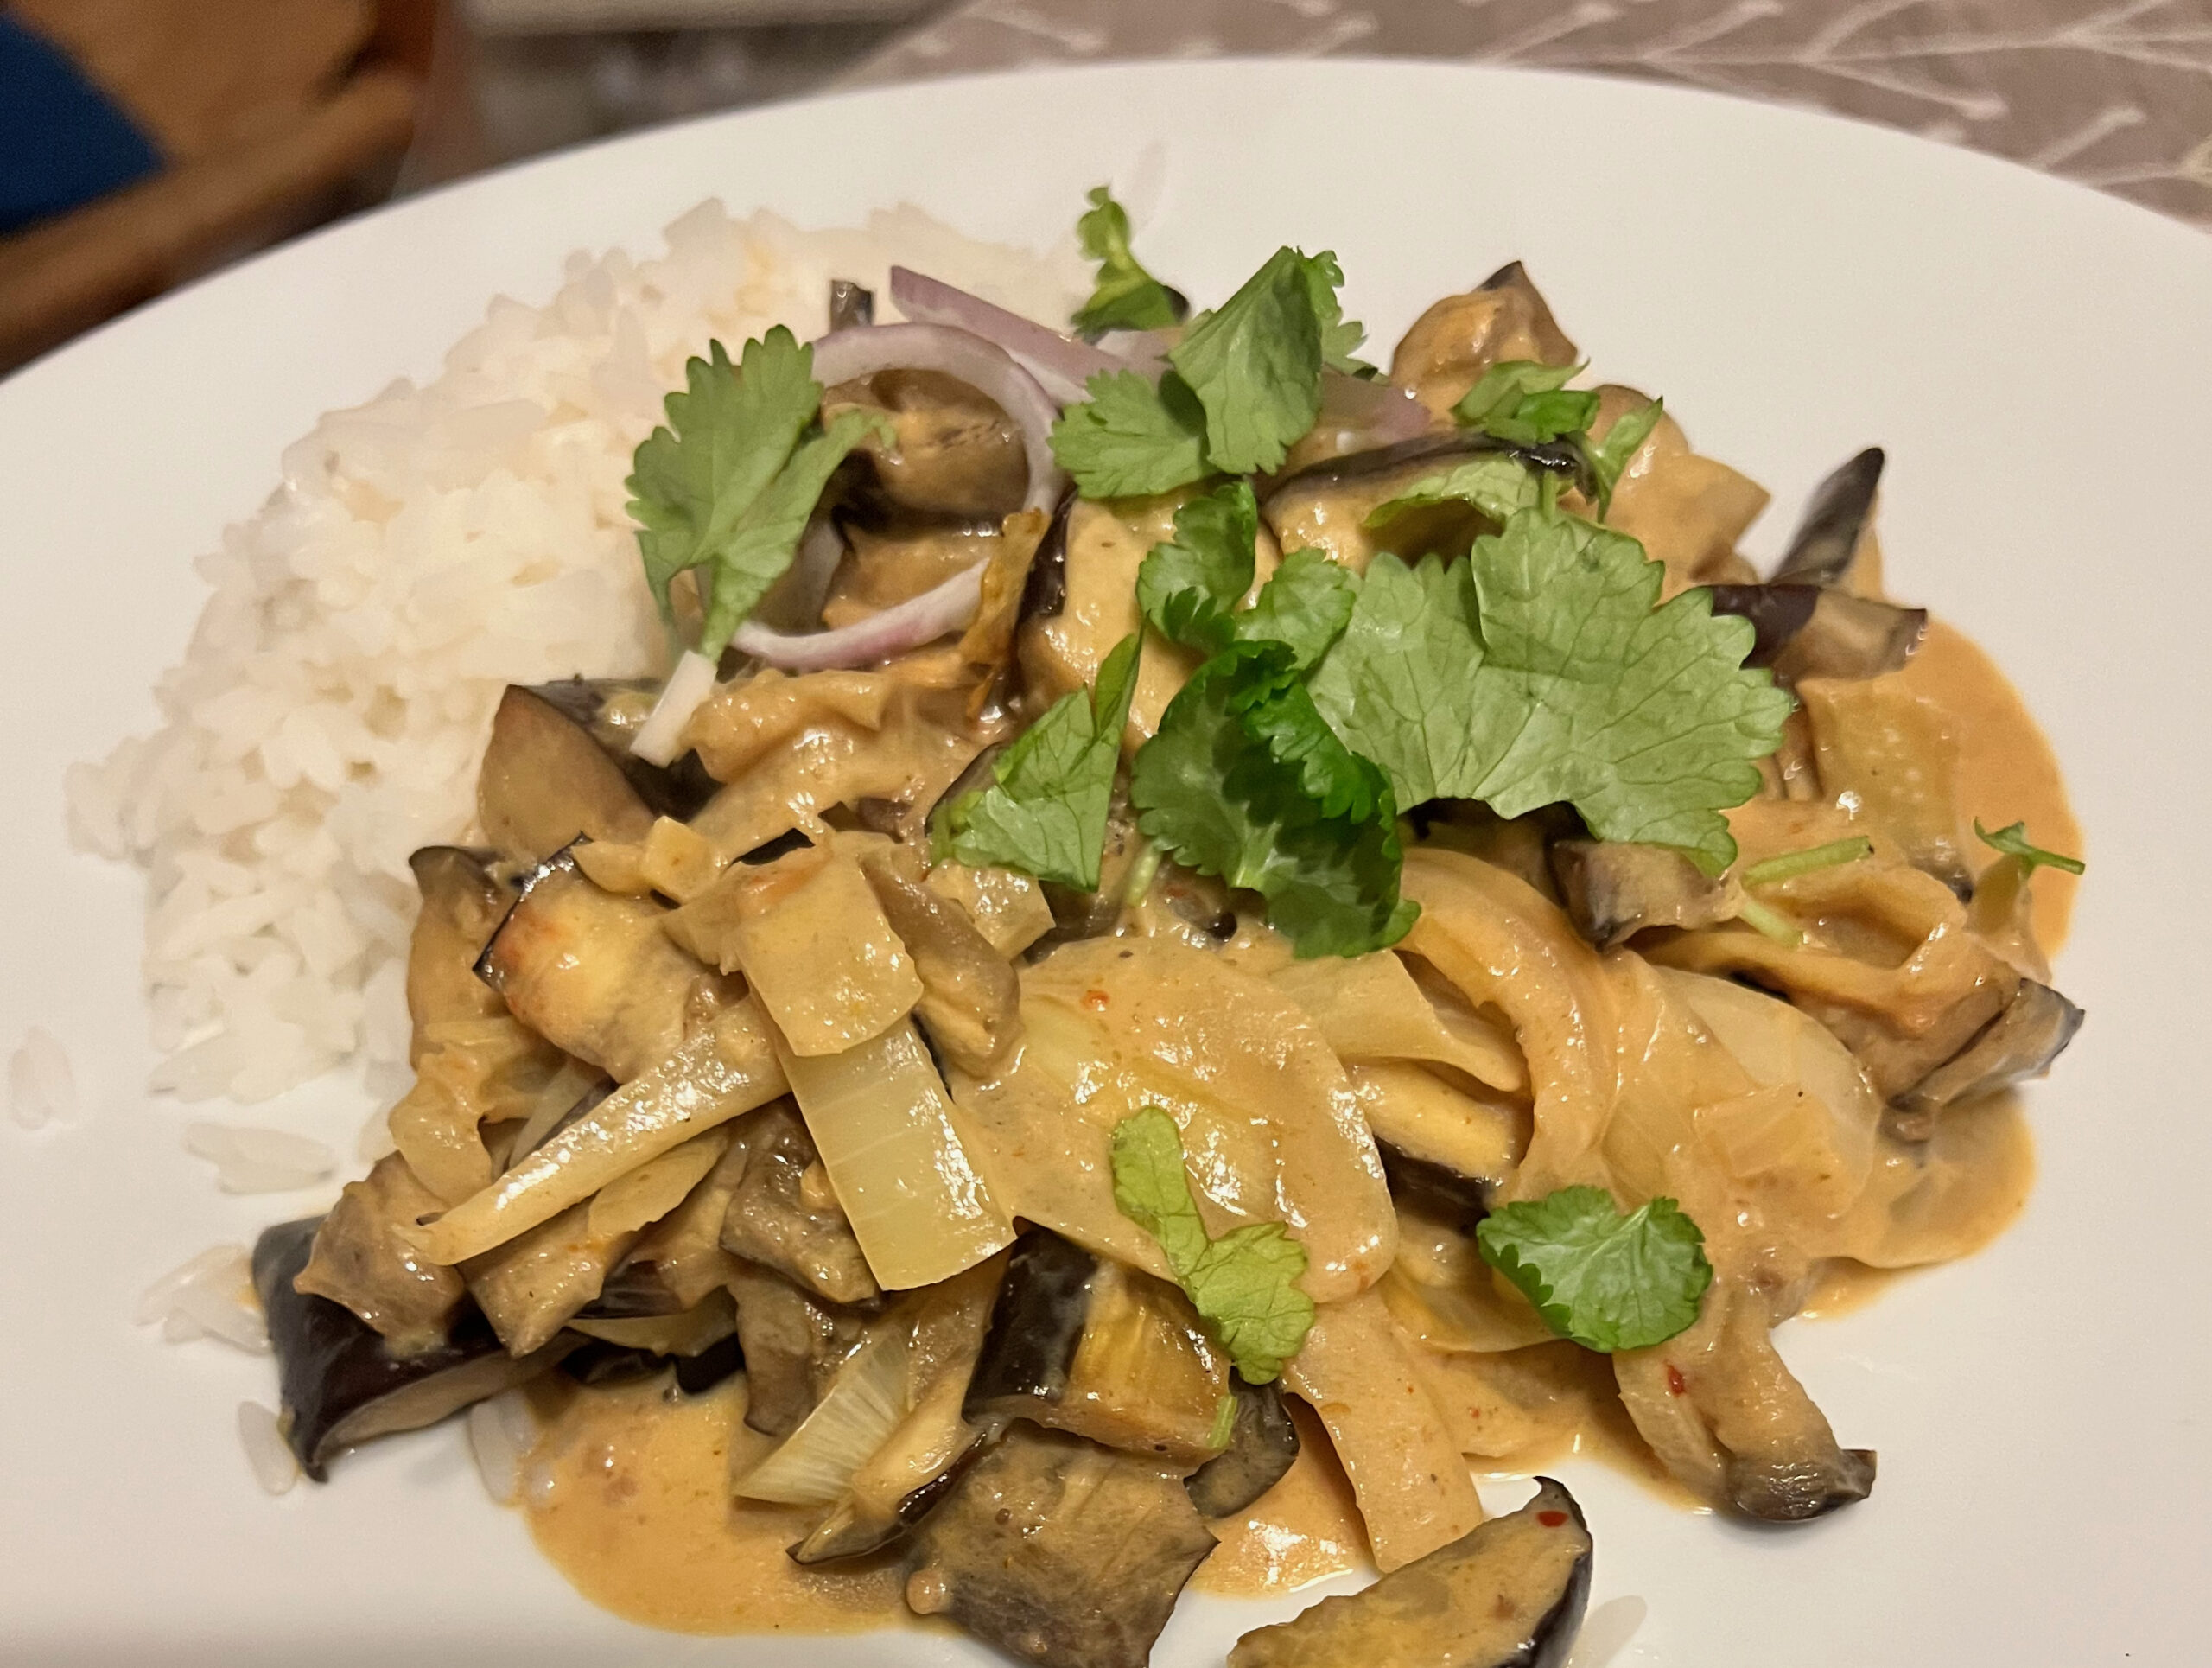 Cooked from scratch and self grown: mushrooms on the plate